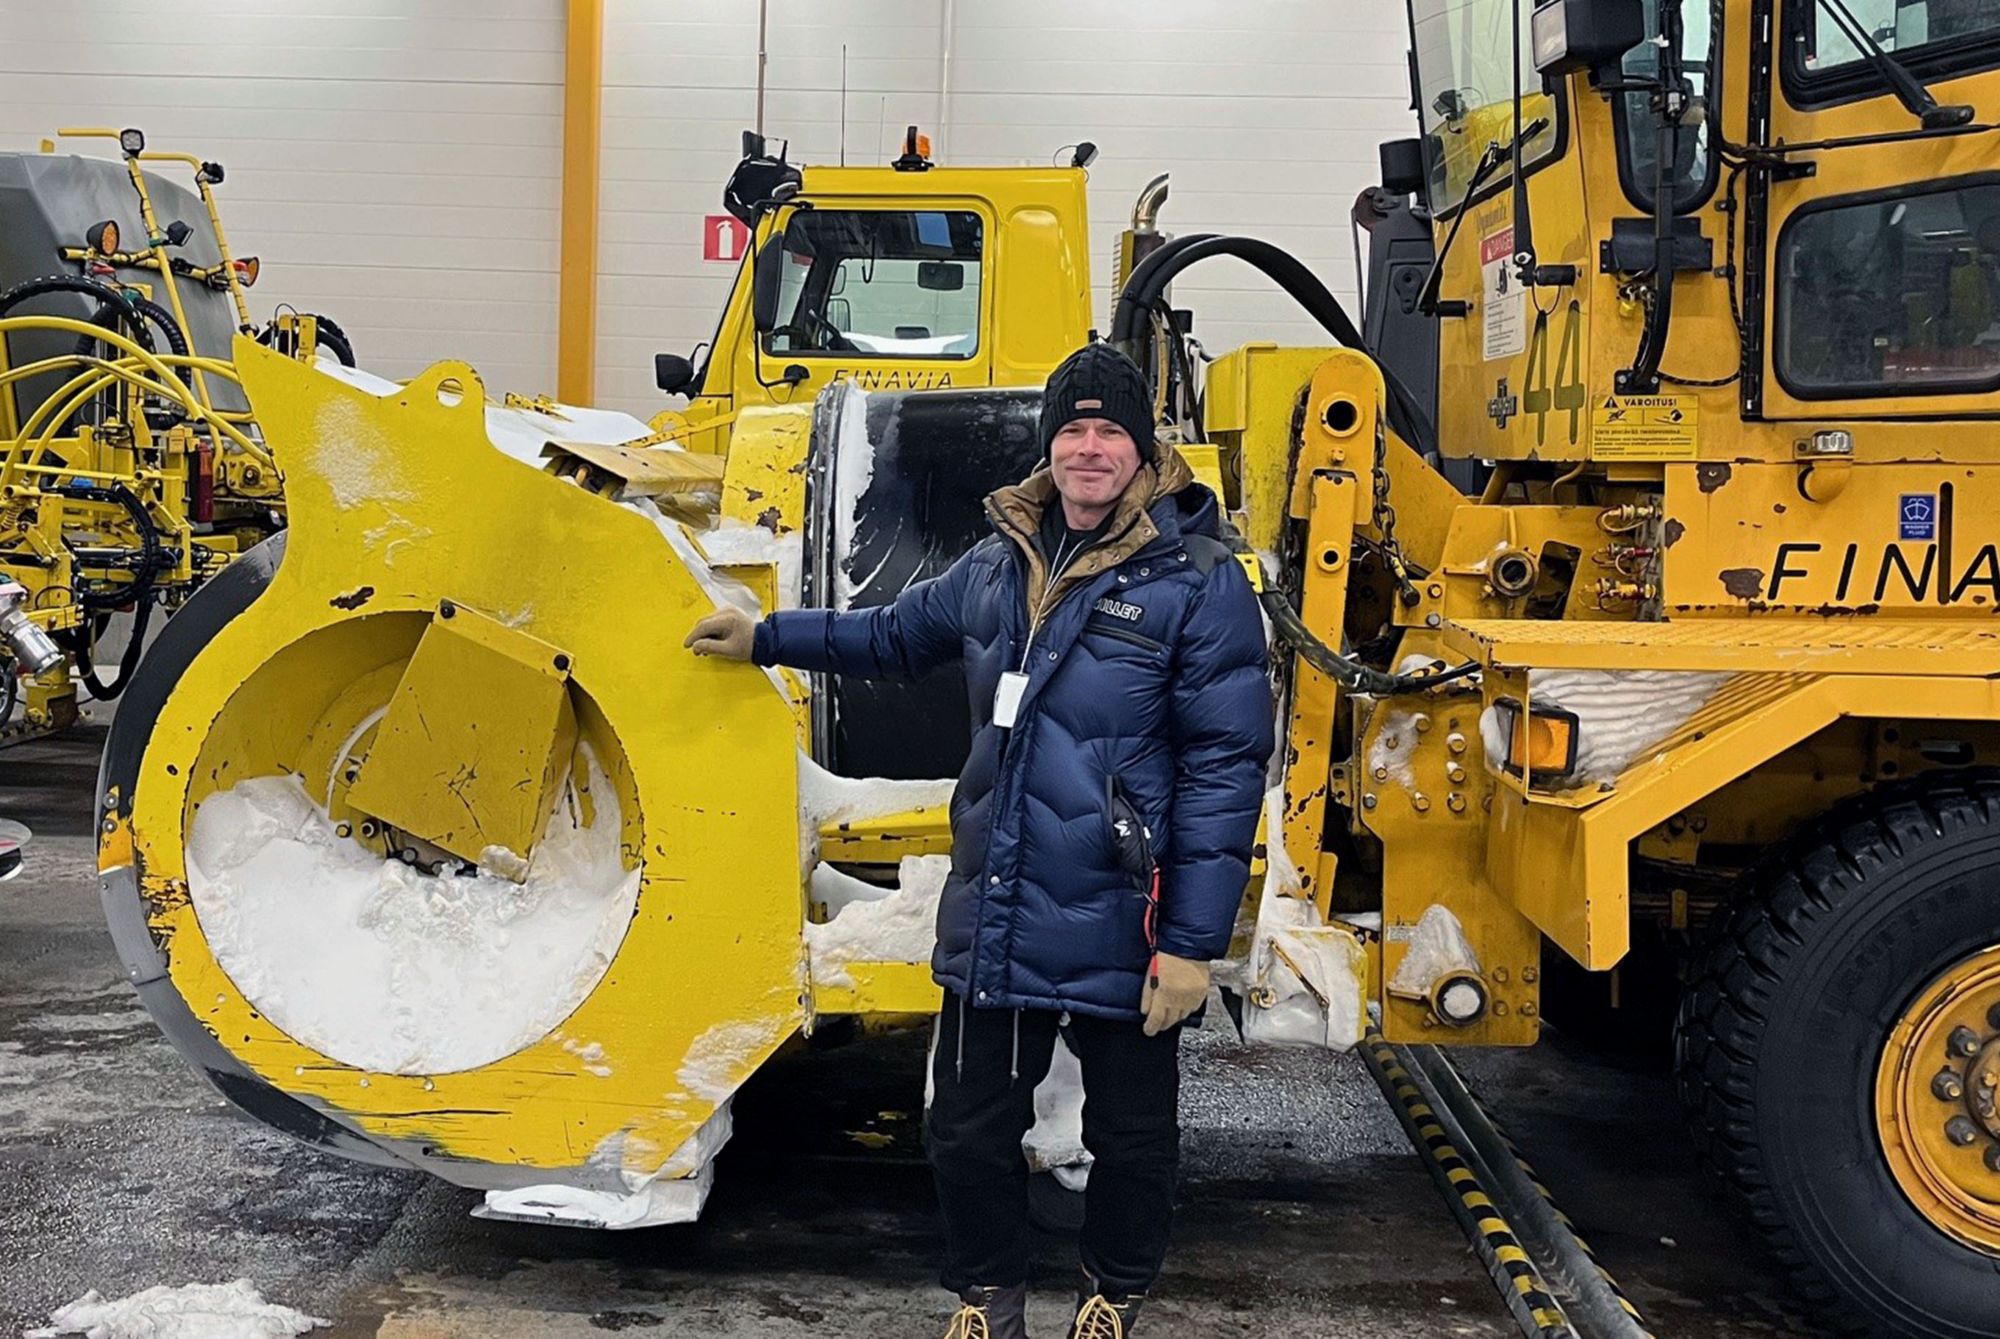 Eastman sales manager Wouter Reyntjens poses with a Finavia snow plow 